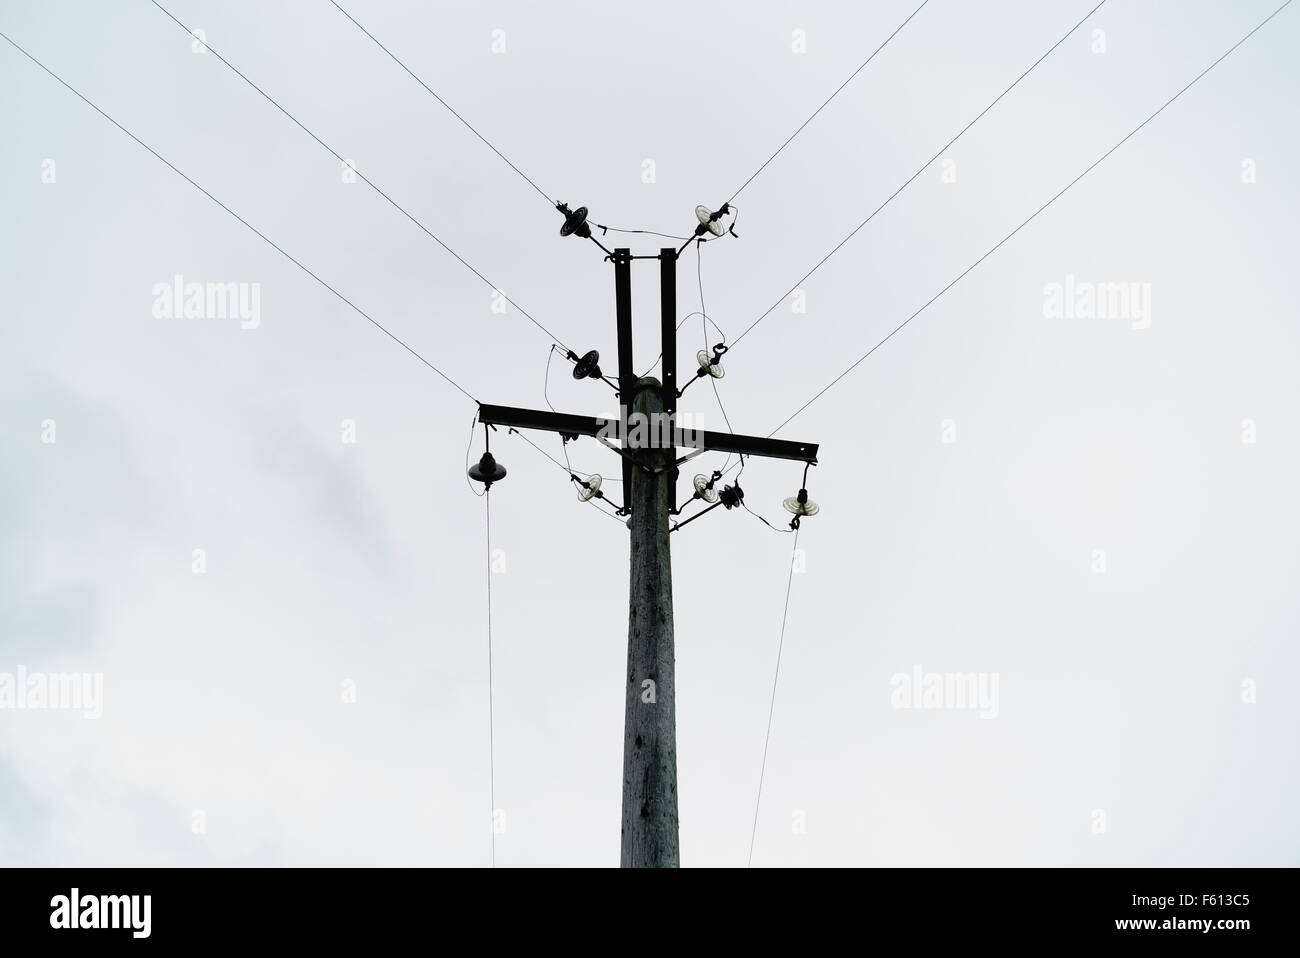 Overhead electricity power lines and pole Stock Photo